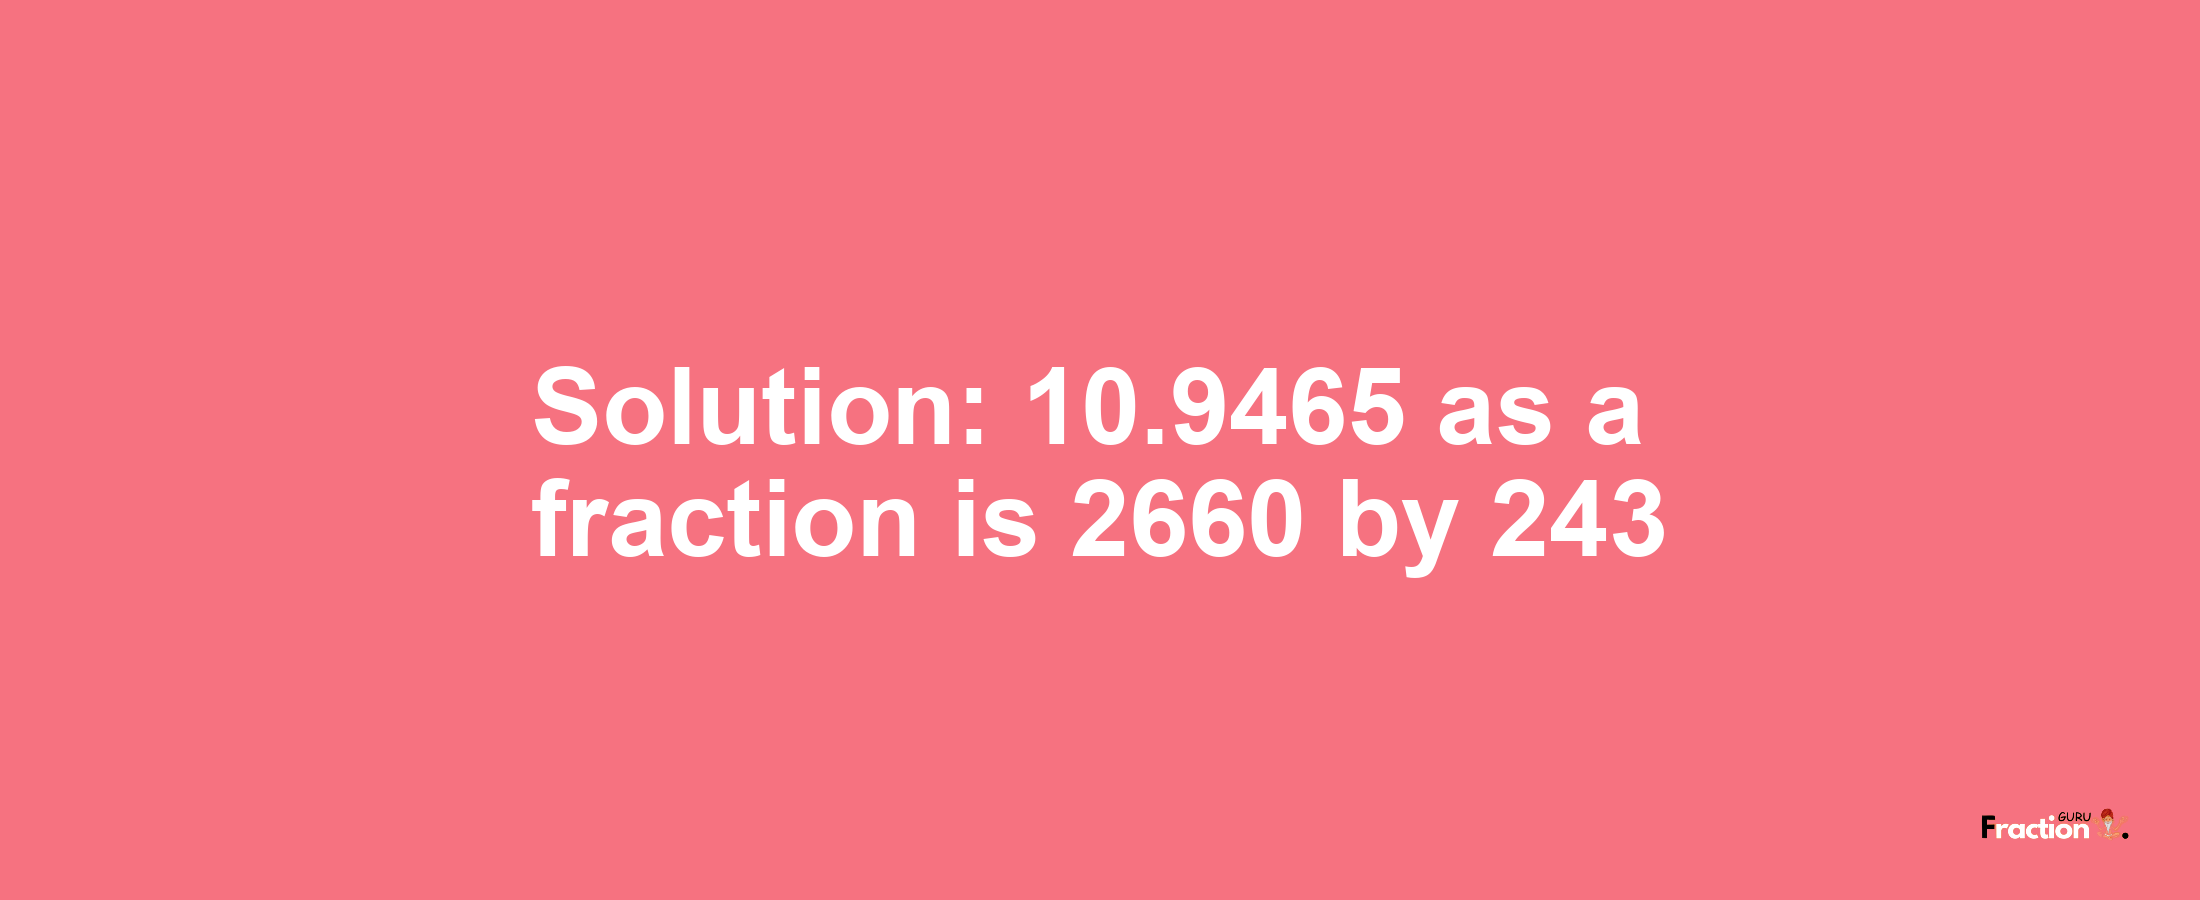 Solution:10.9465 as a fraction is 2660/243